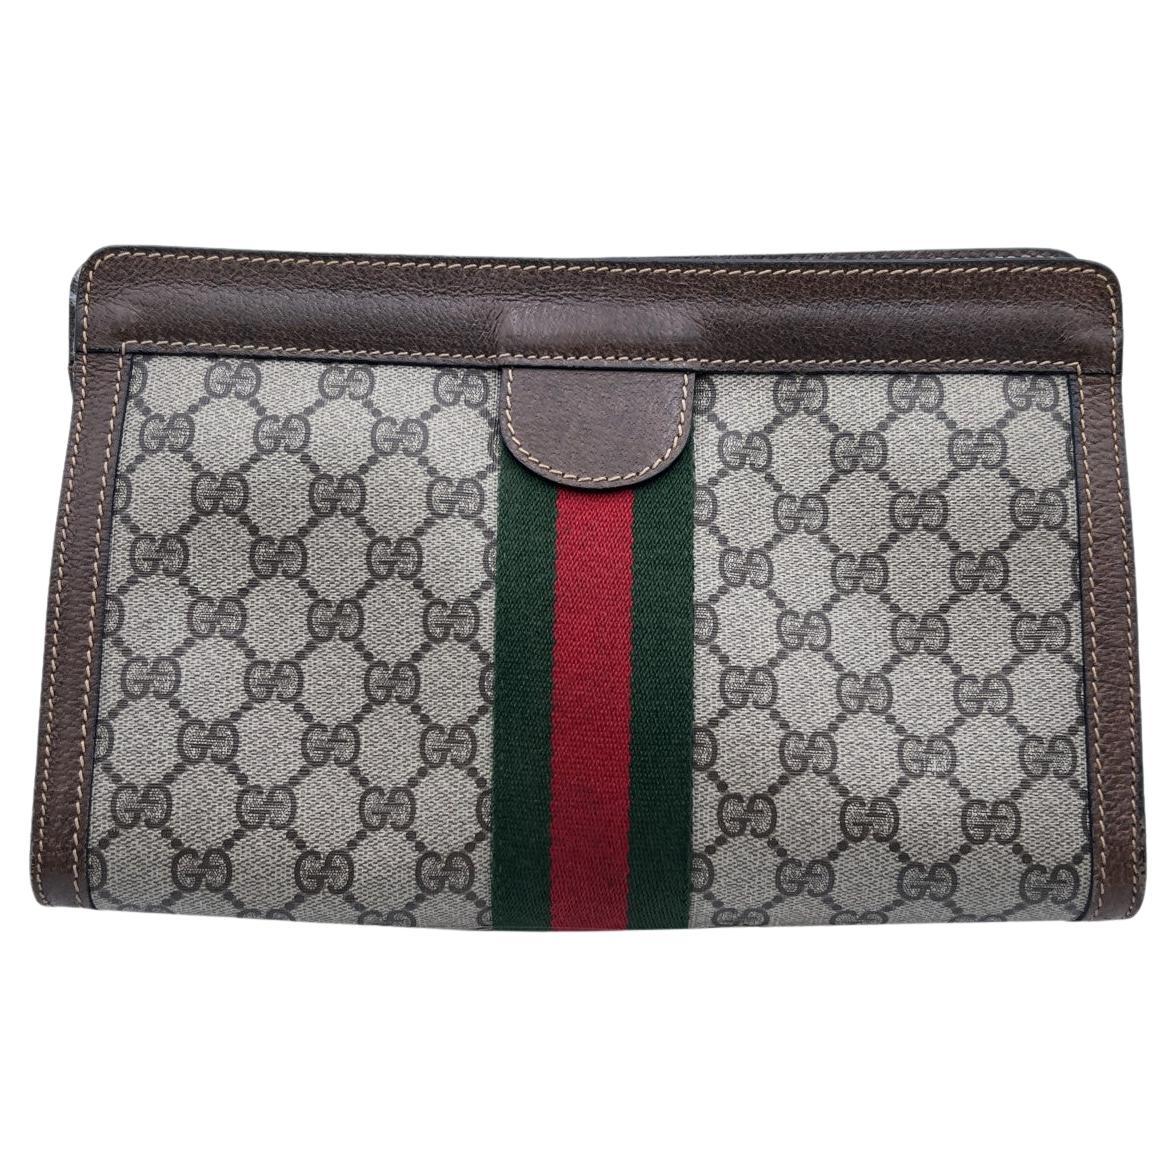 Gucci Multicolor Fabric Limited Edition Tom Ford Horsebit Chain Clutch ...